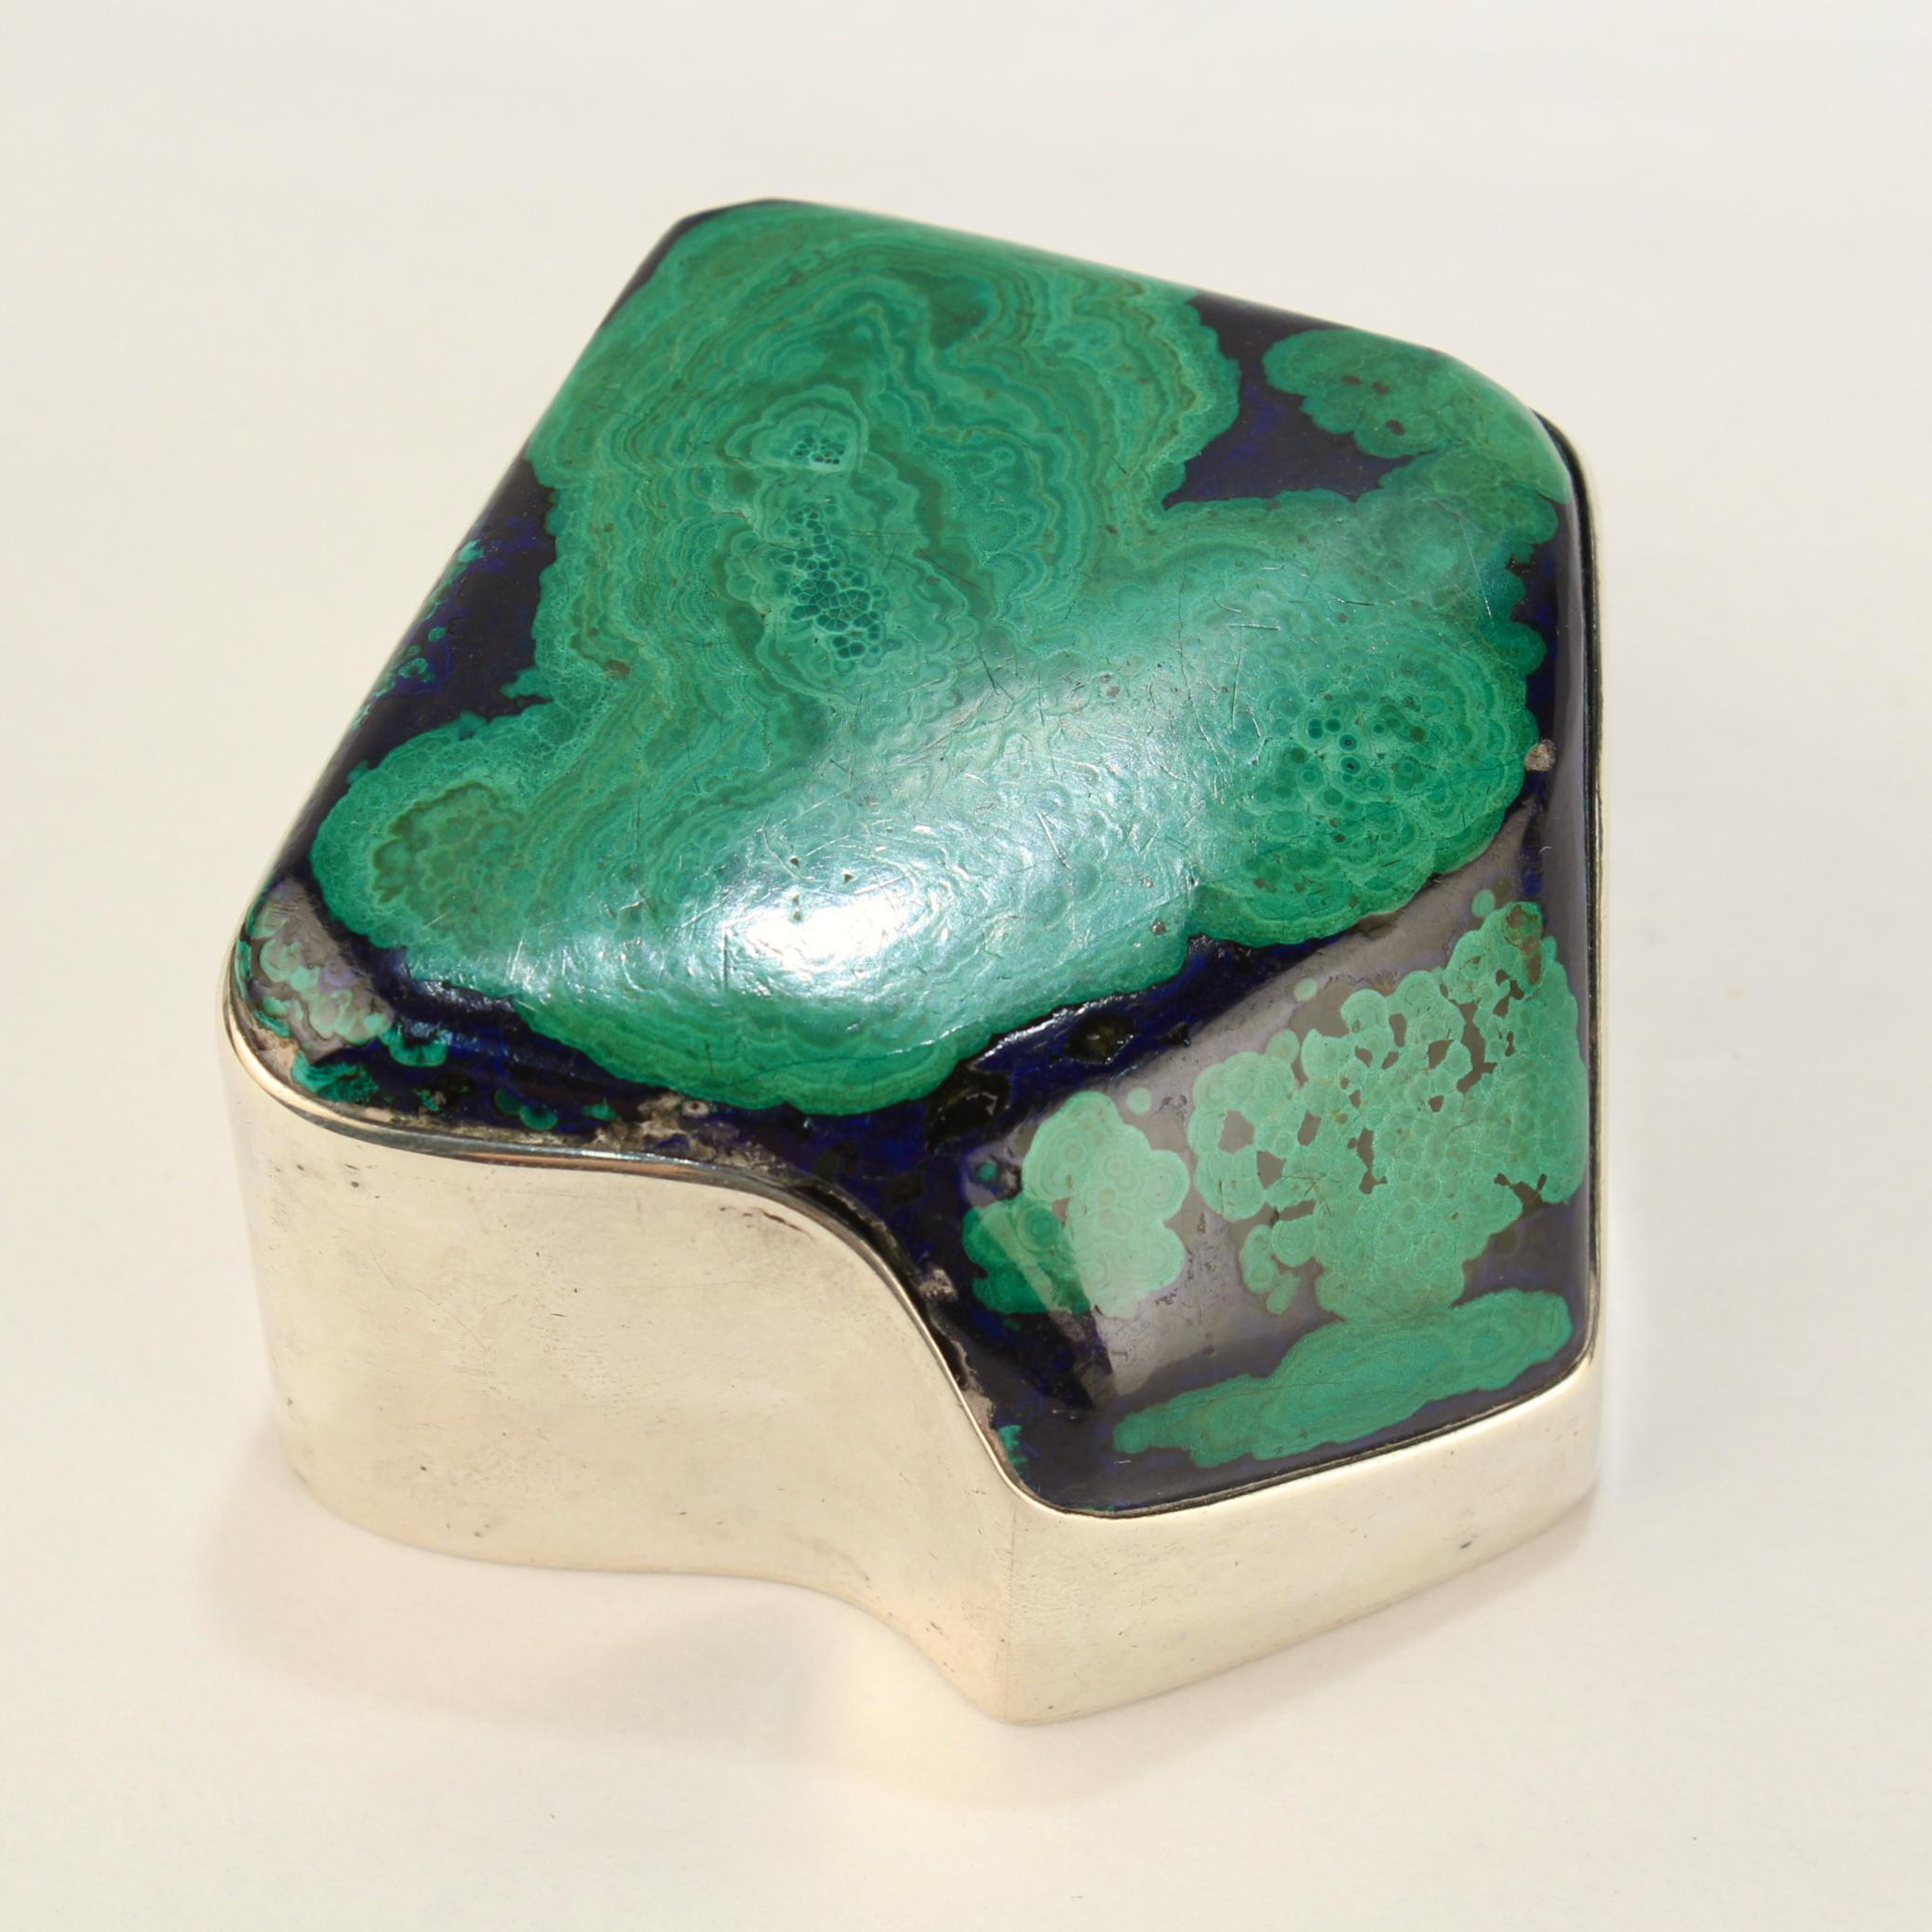 A fine Edwardian silver mounted gemstone specimen paperweight.

Made by Goodnow & Jenks for the Boston retailer Bigelow, Kennard & Co.

With a large azurite-malachite specimen polished and encased in a silver mount.

Simply an amazing paperweight